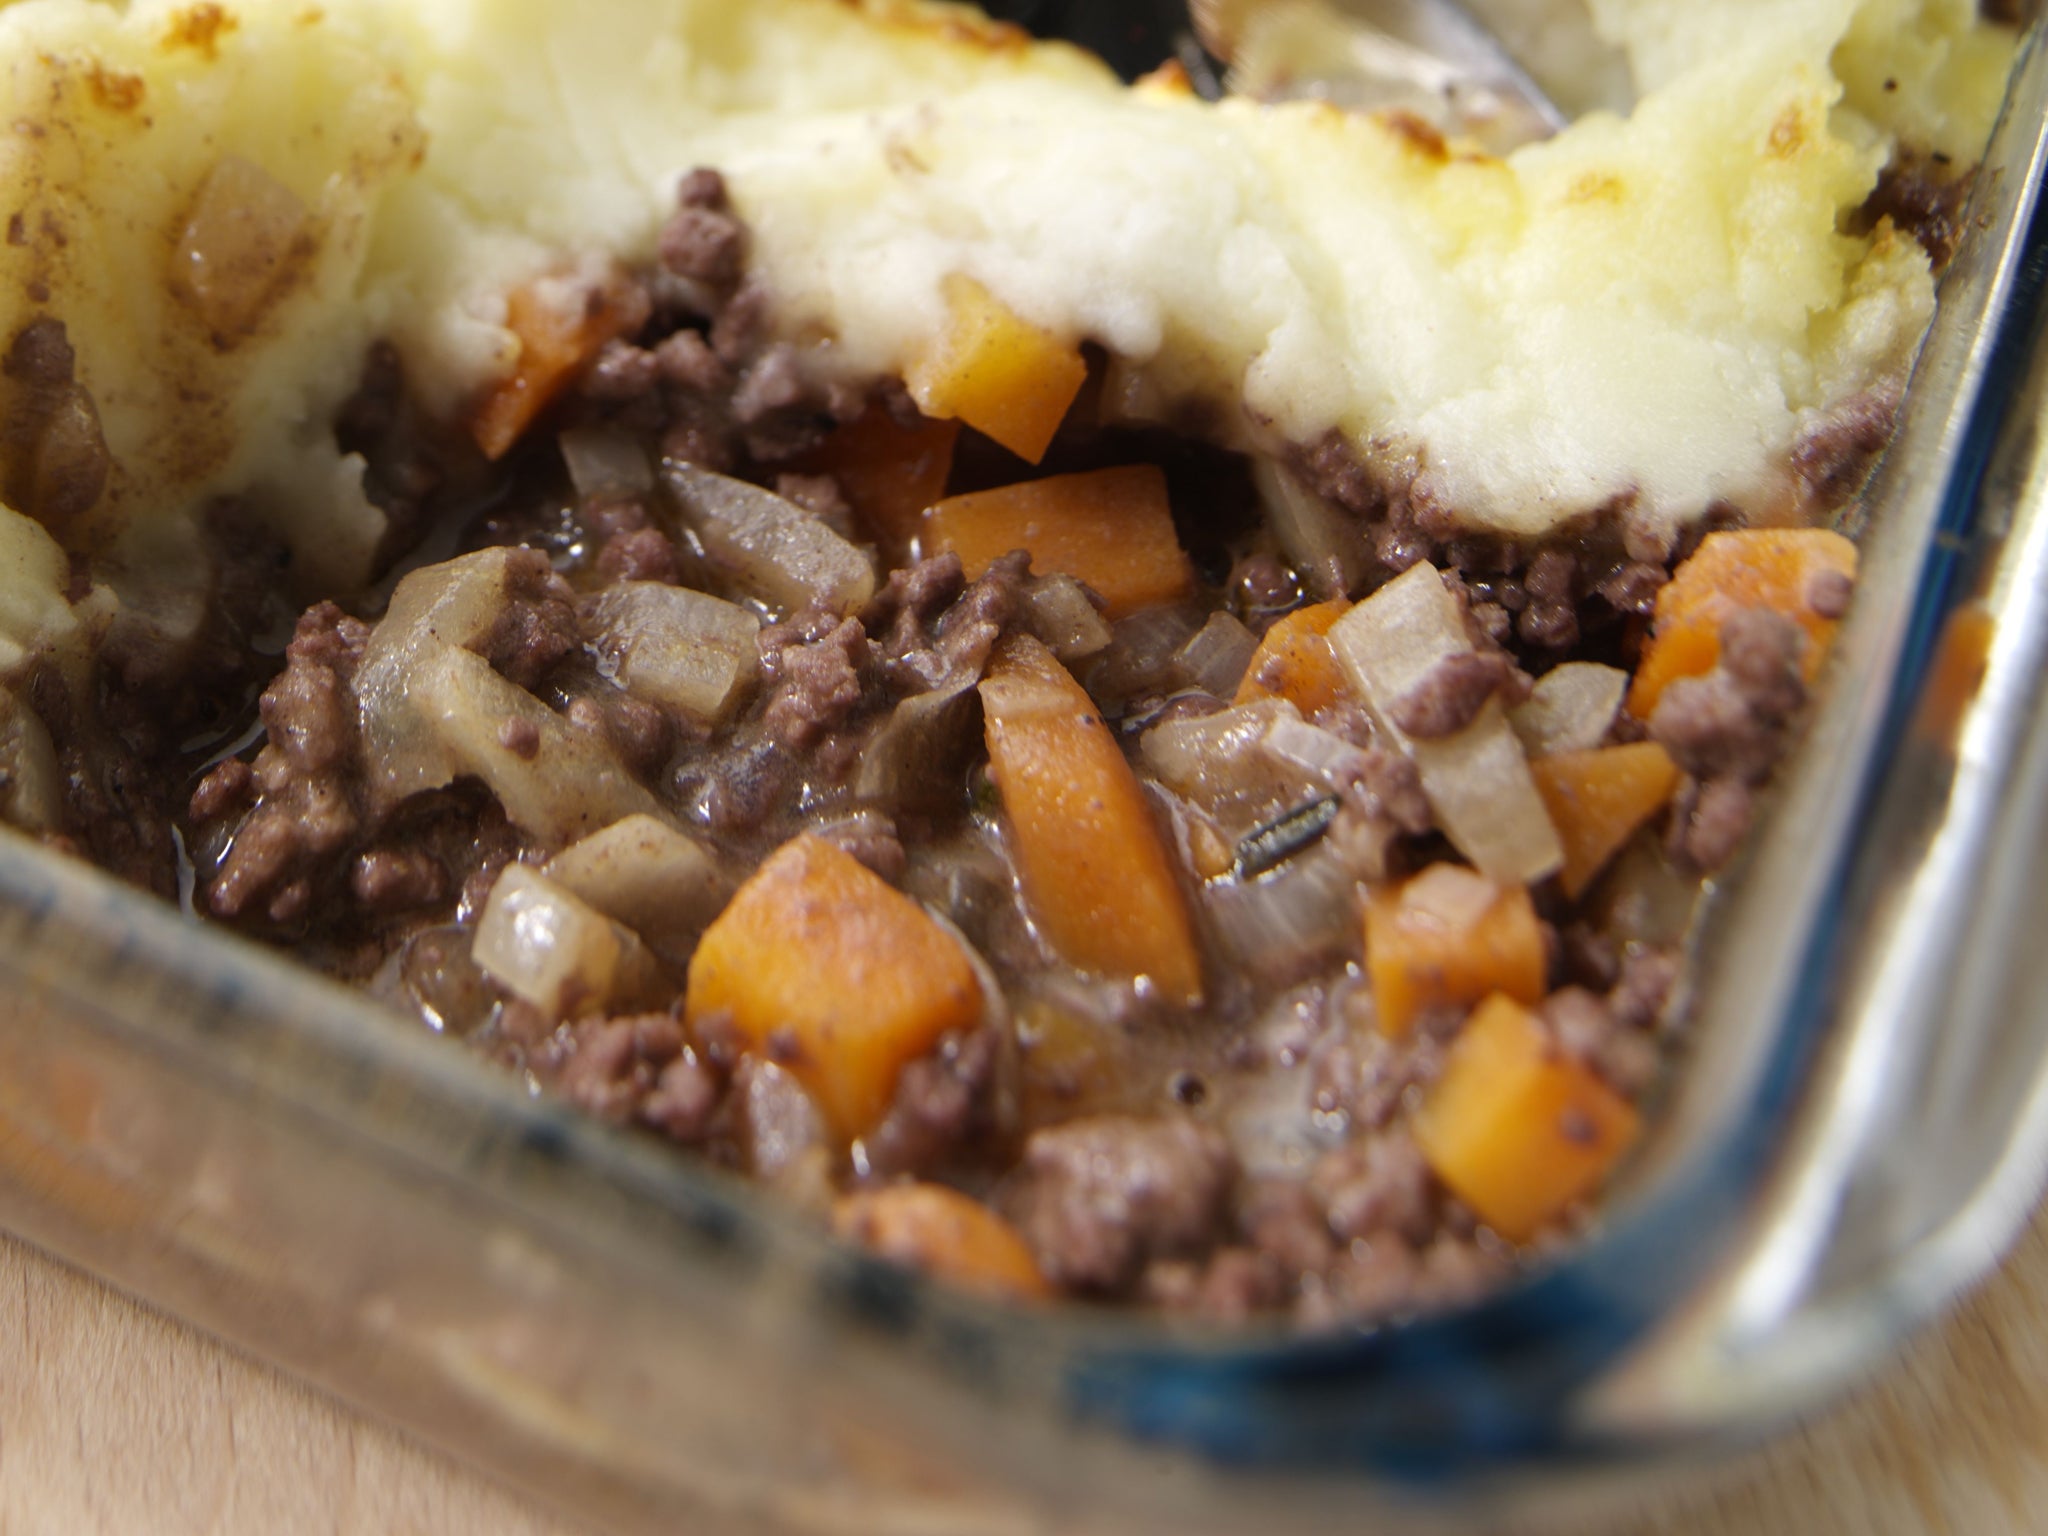 Lancashire County Council said it has withdrawn the pre-prepared beef product from 47 school kitchens